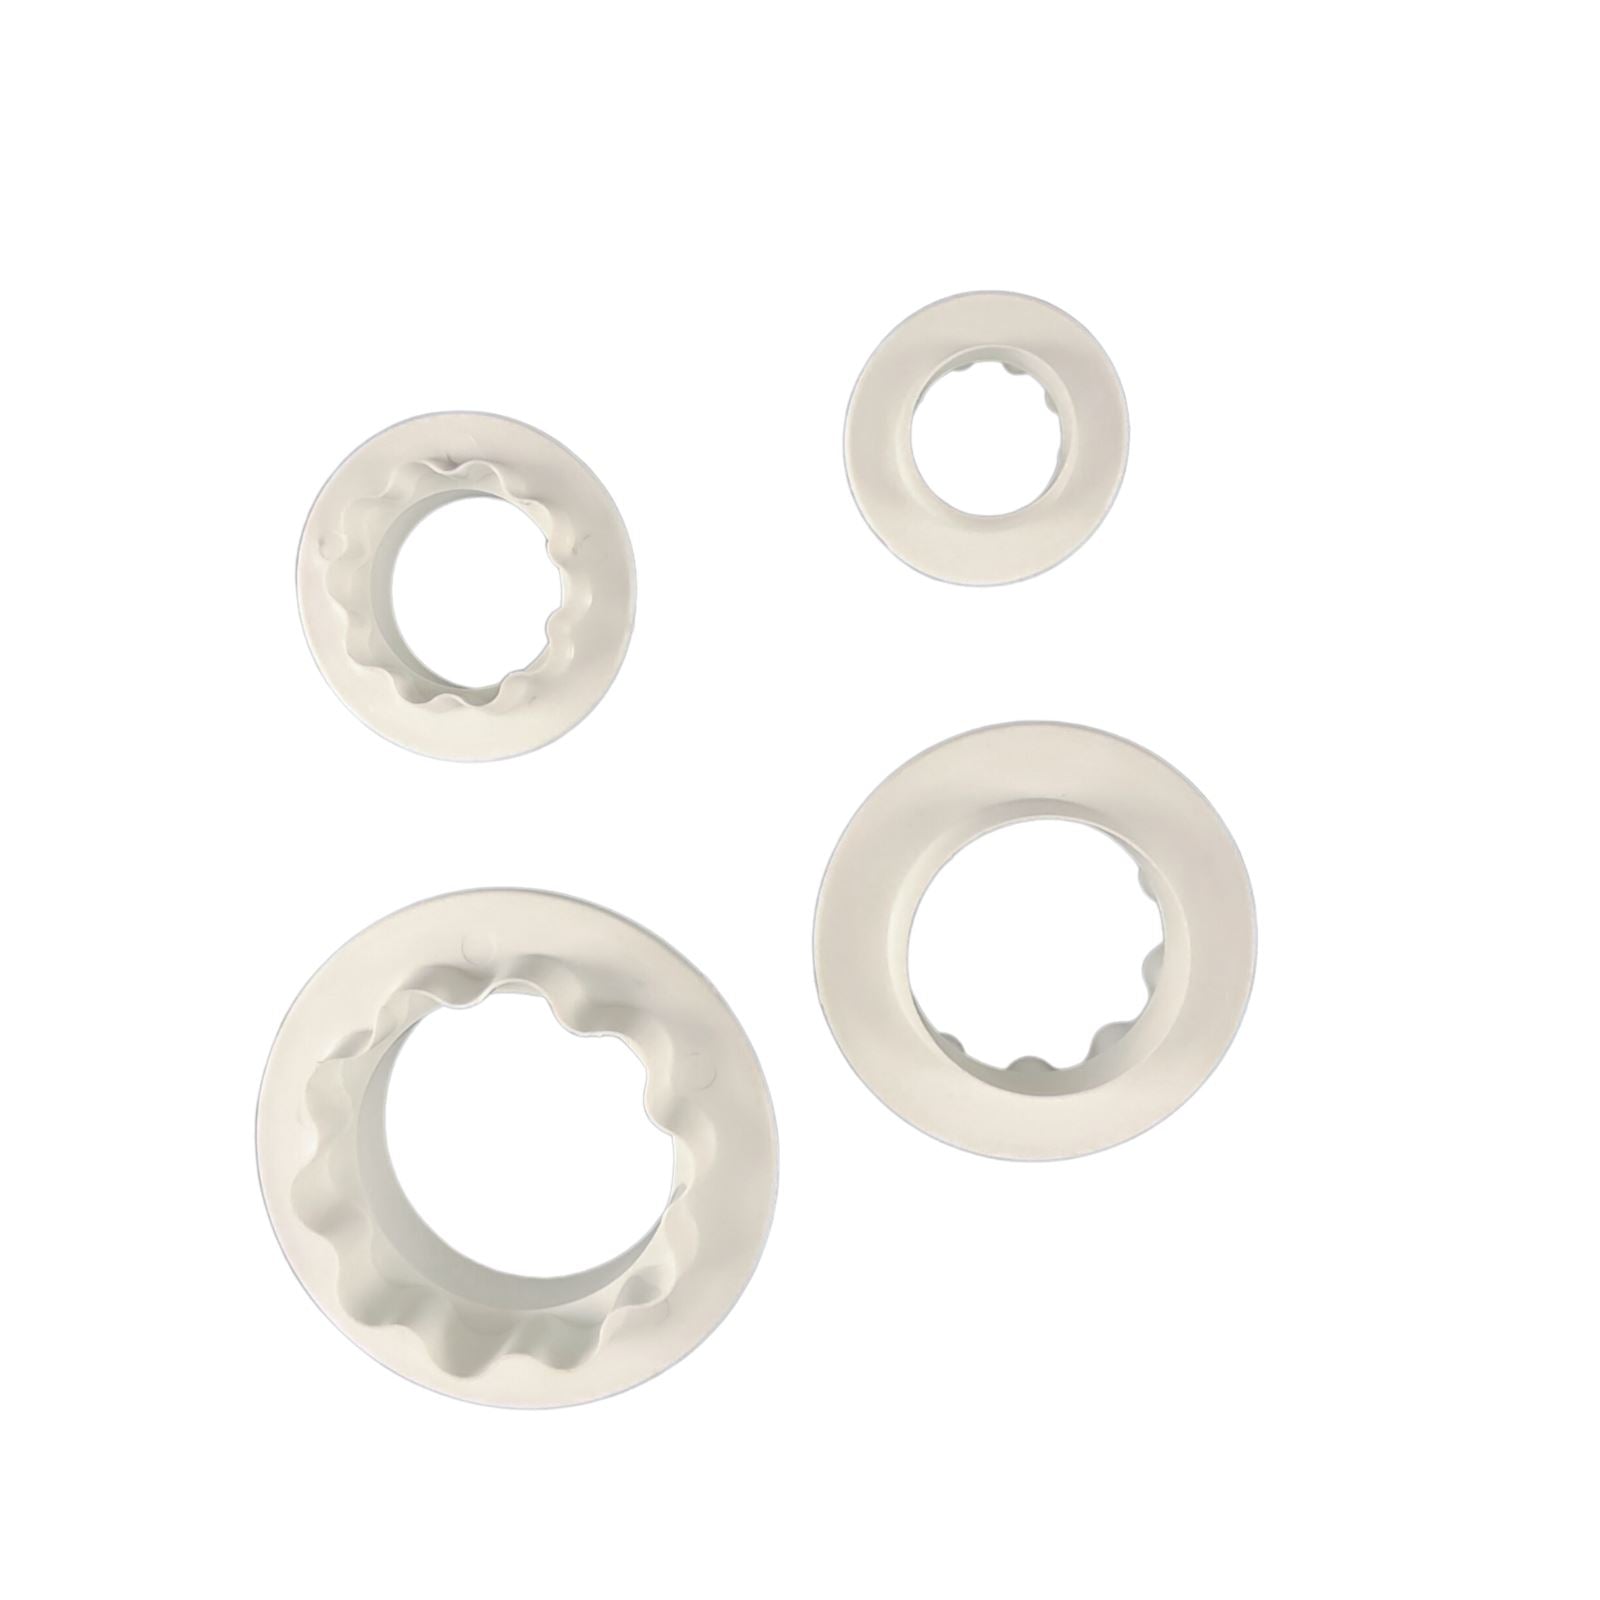 Set of 3 Double Sided Round and Wavy Cutters